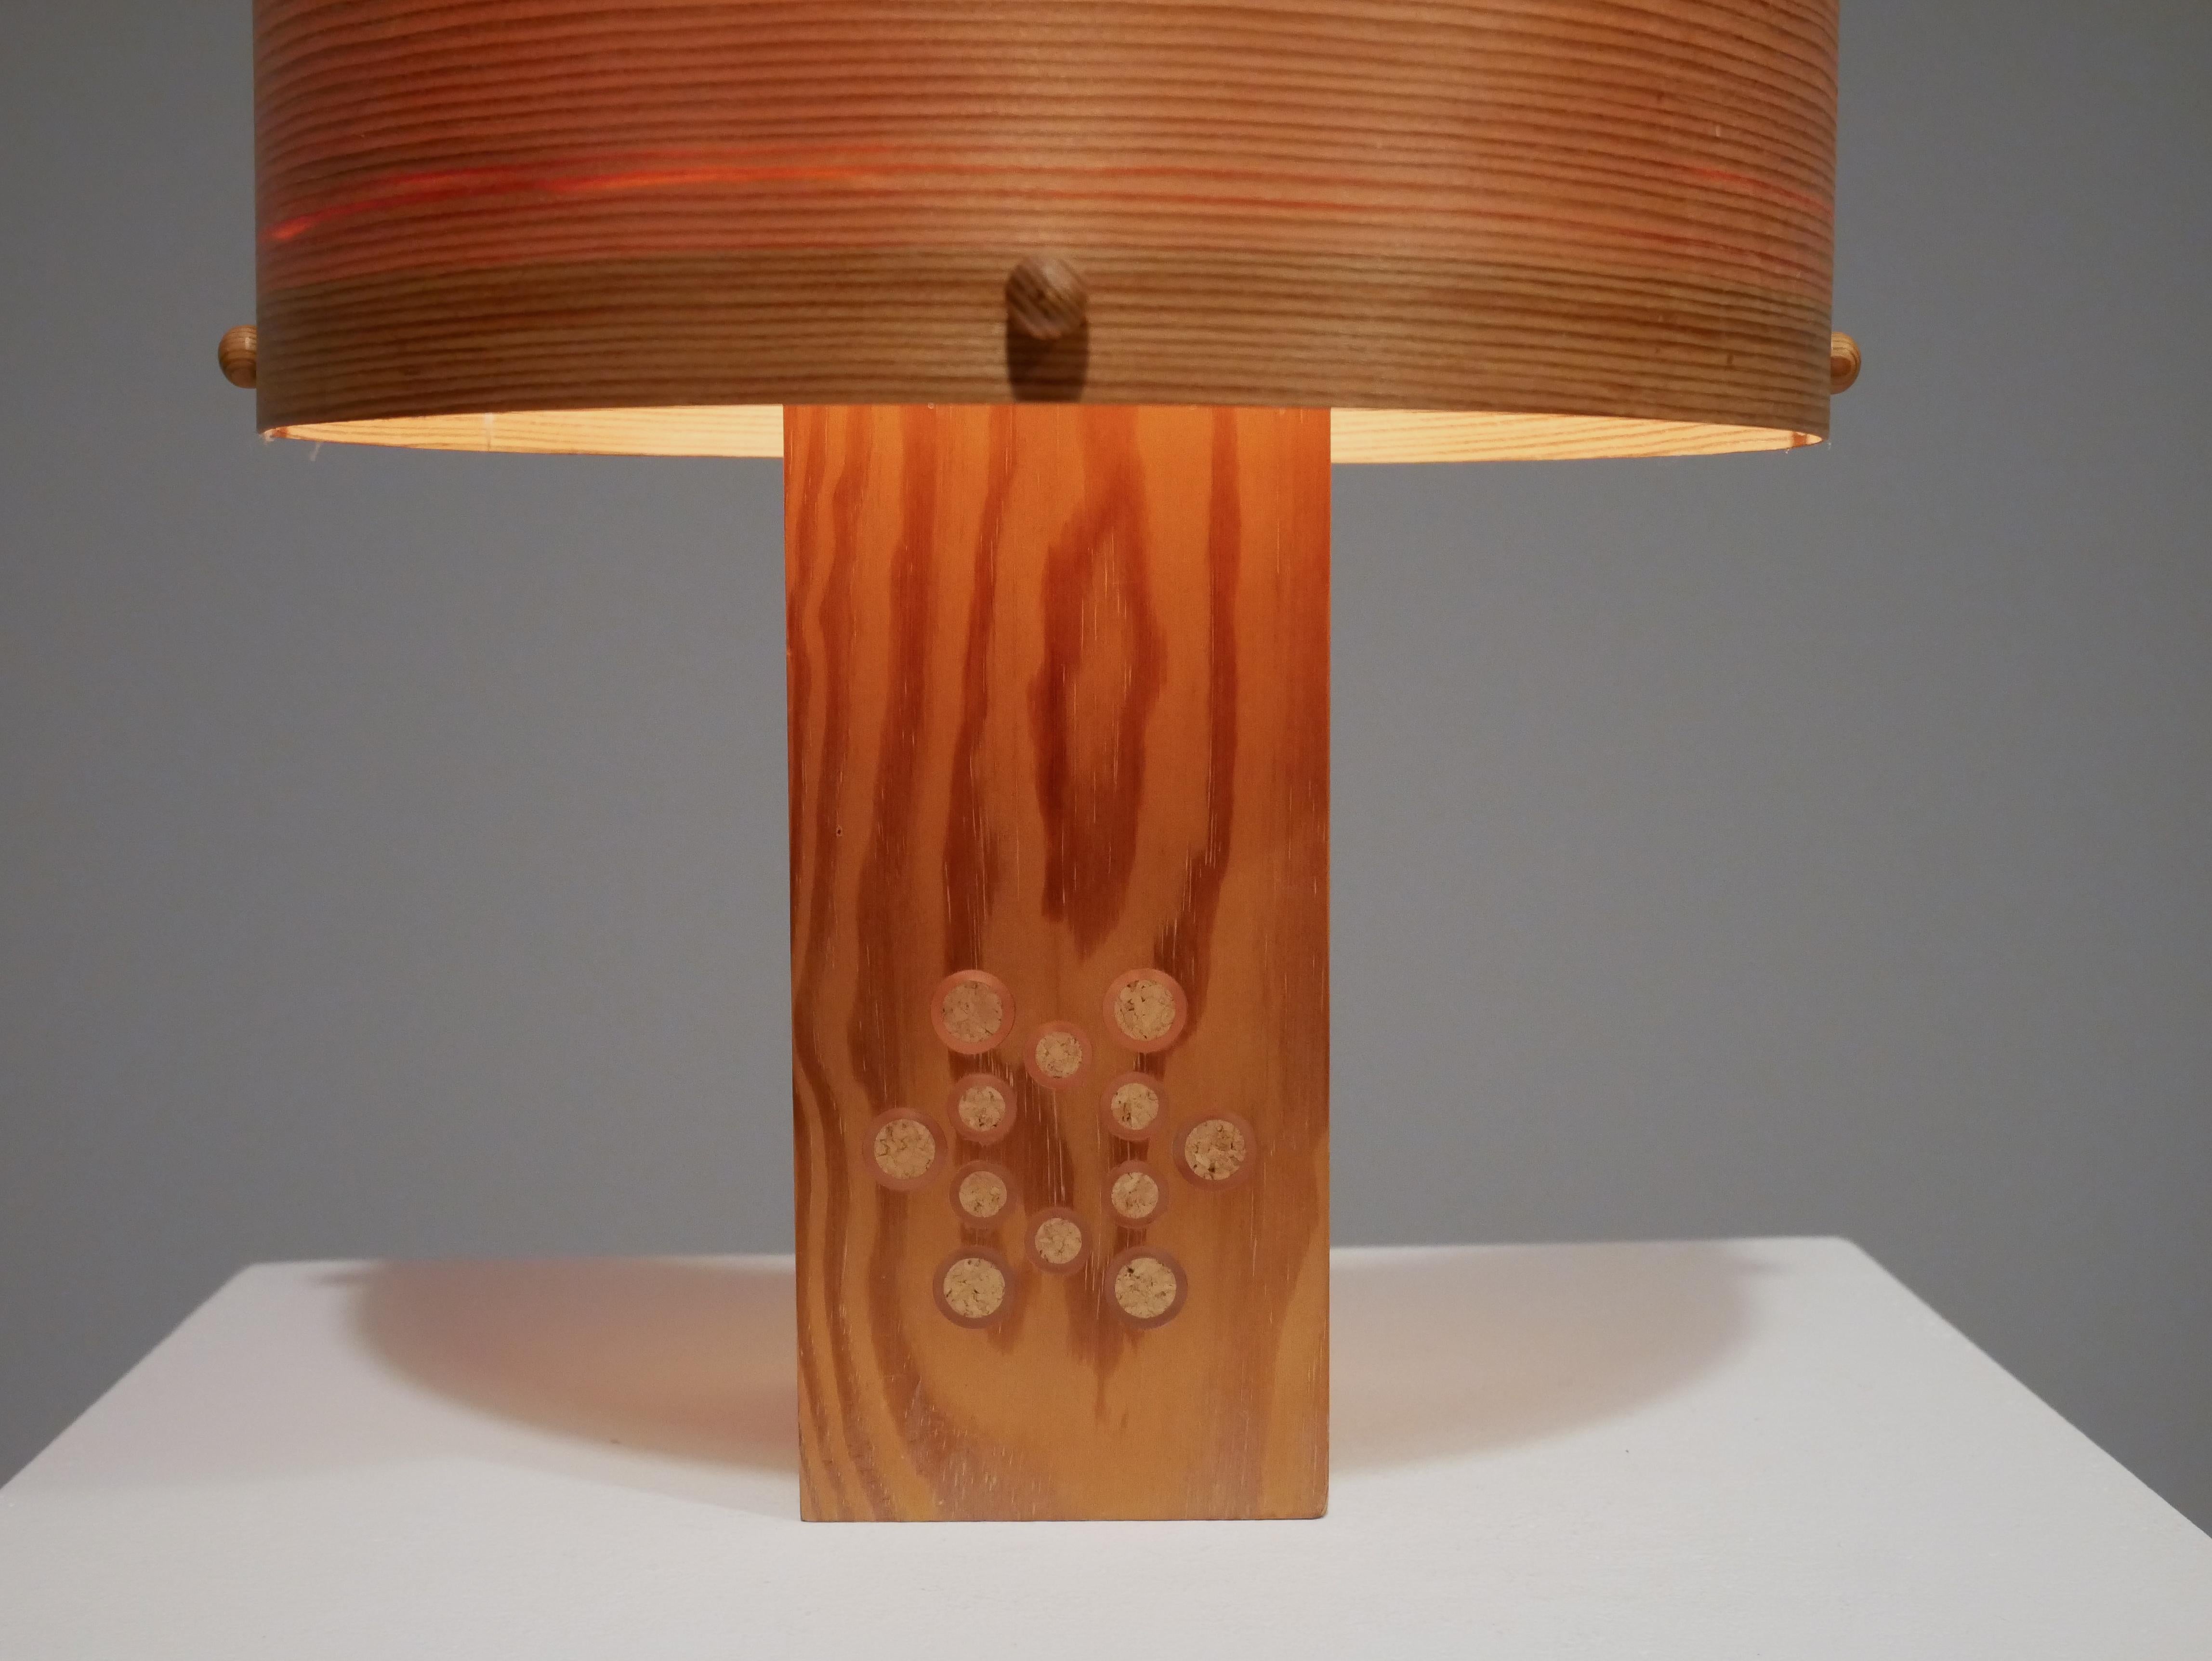 Scandinavian Modern Table Lamp in Solid Pine from the Swedish Company Pileprodukter, 1970s For Sale